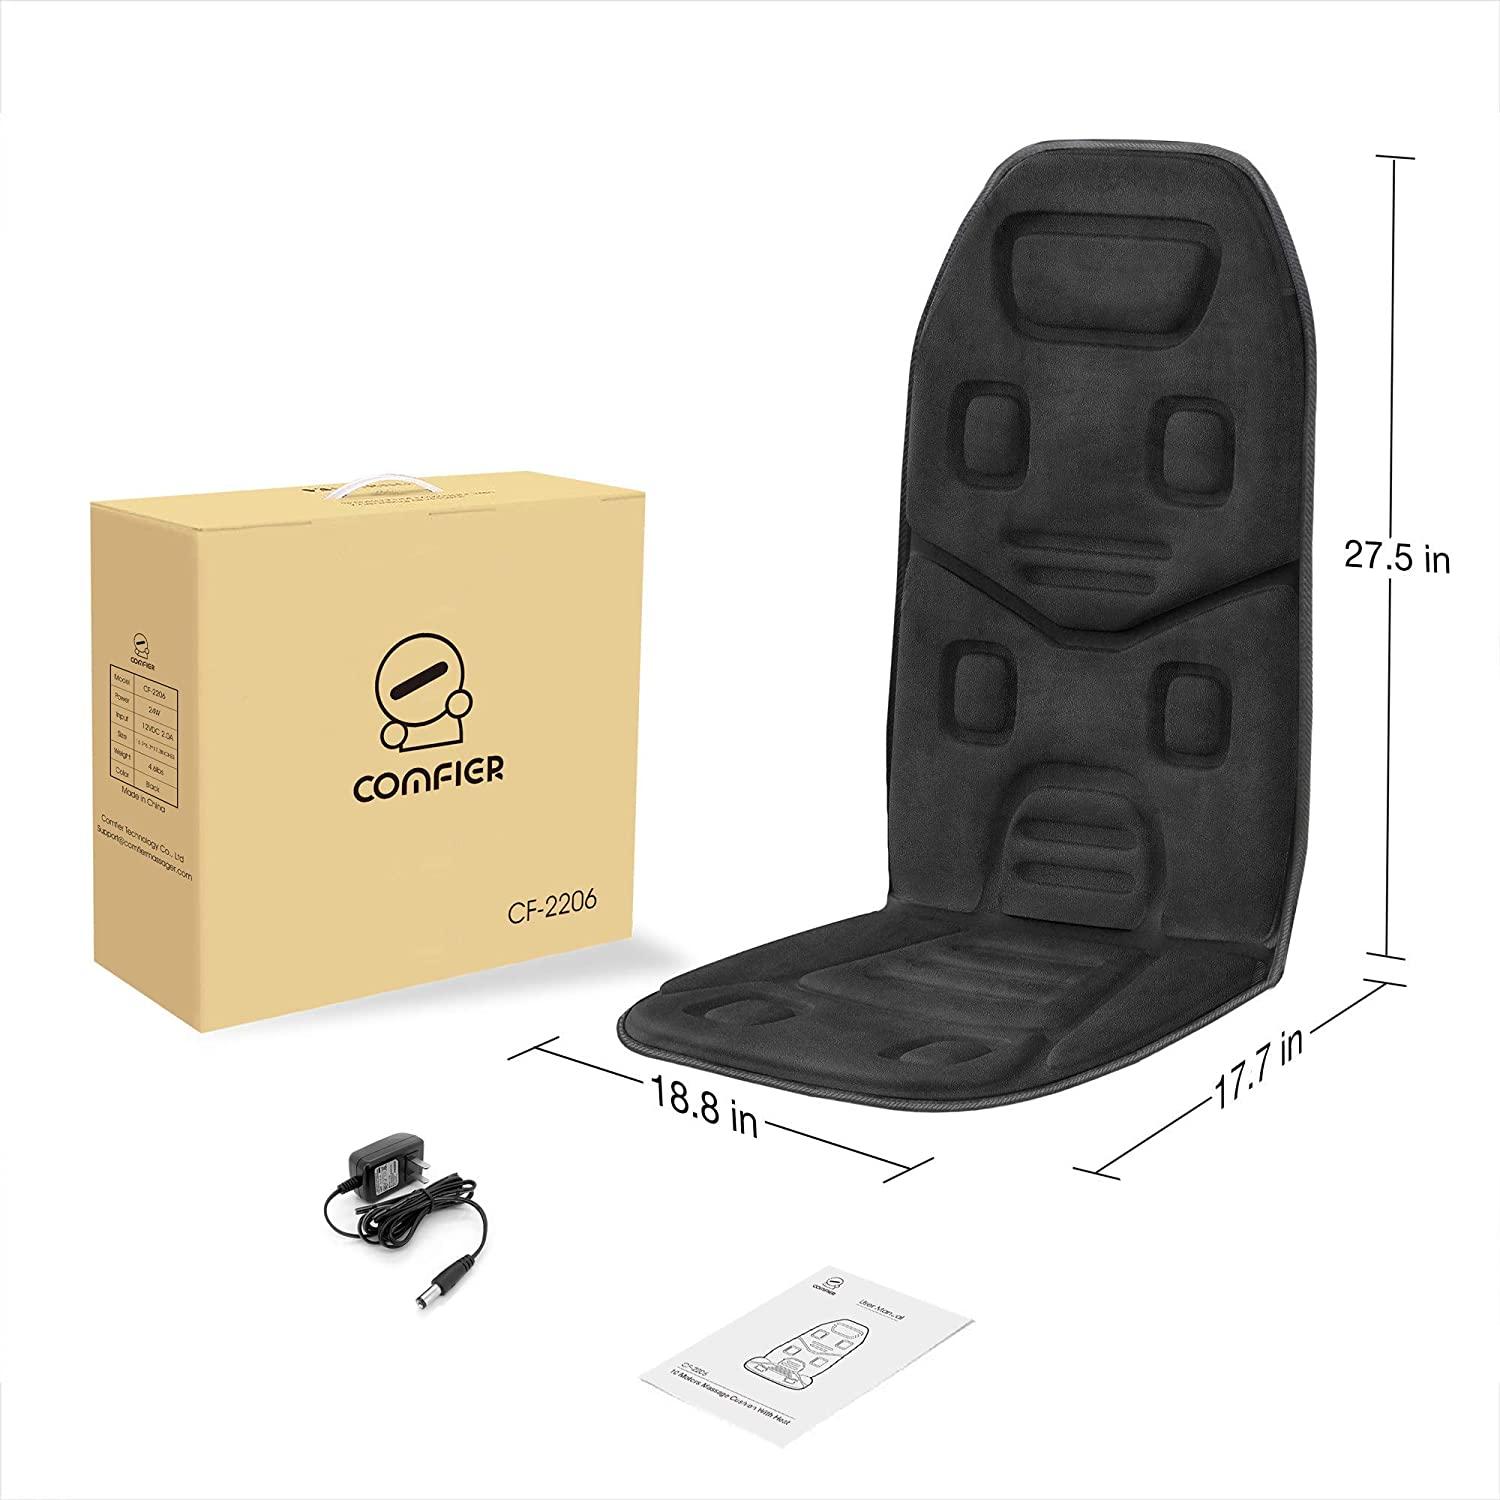 Comfort Products Massage Seat Cushion, 10 Motor with Heat, Black 60-2910